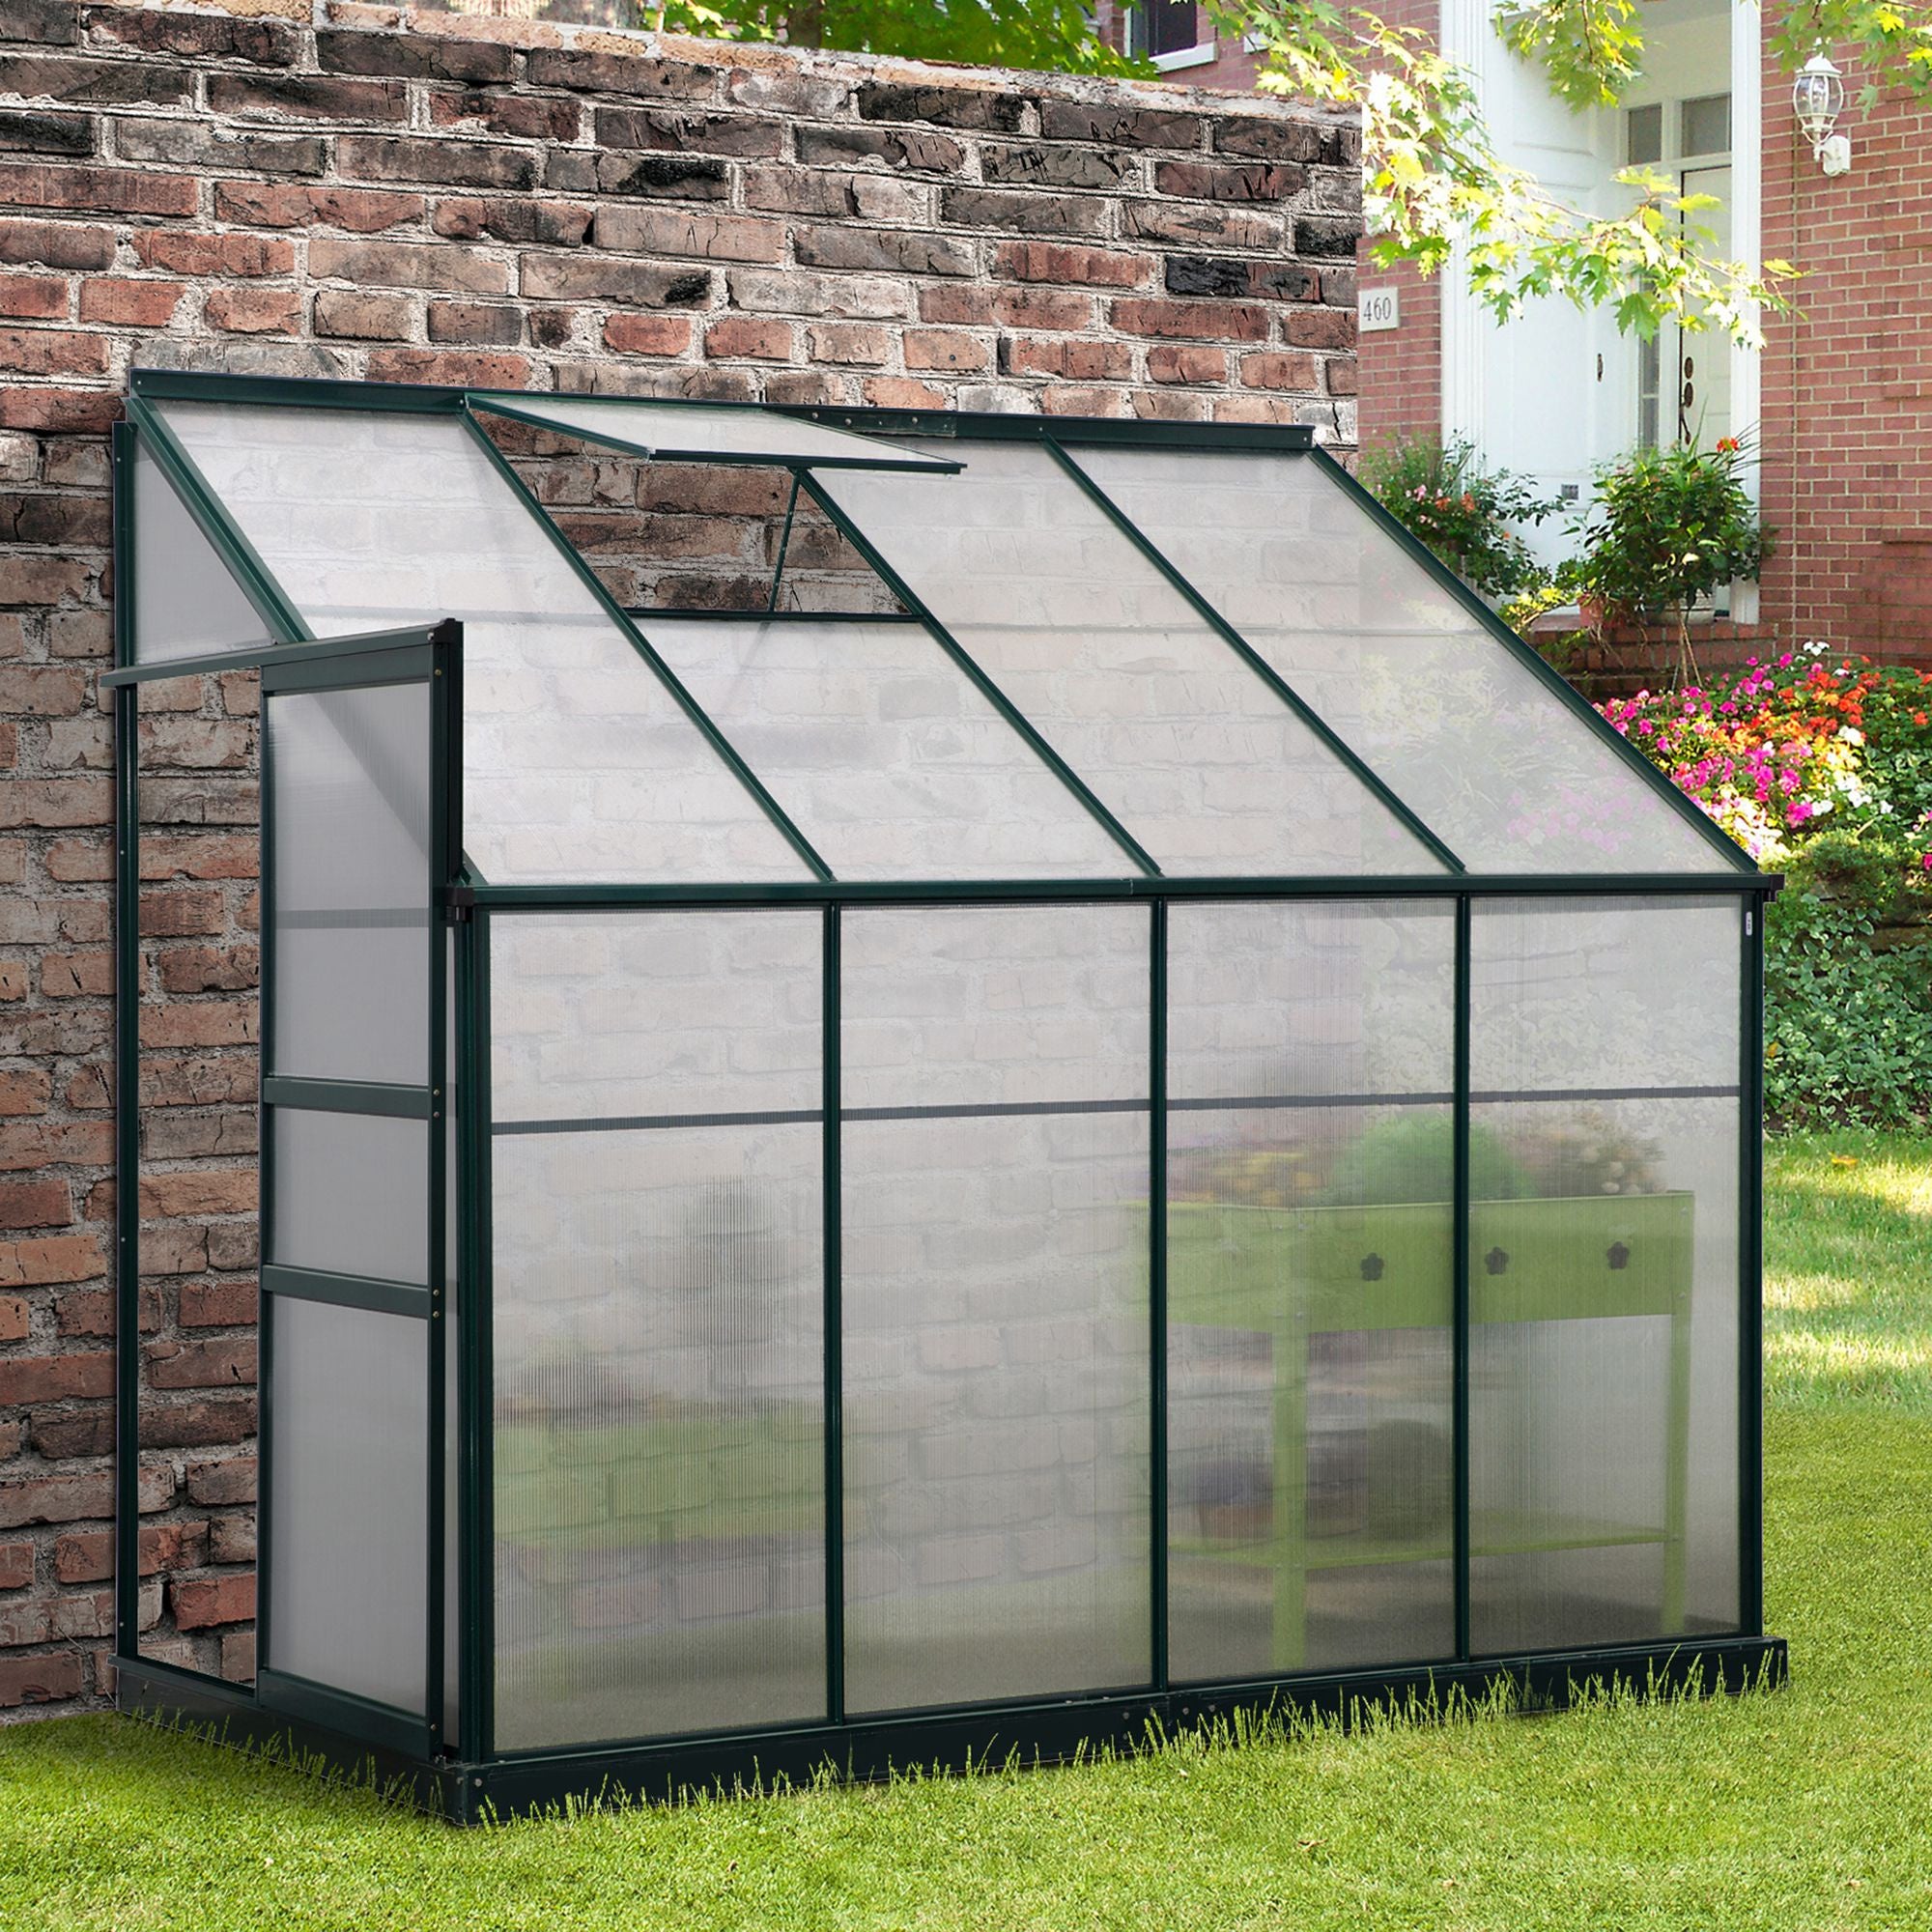 8.25’ x 4’ x 7.25’ Walk-In Garden Aluminum Polycarbonate Greenhouse with Roof Vent